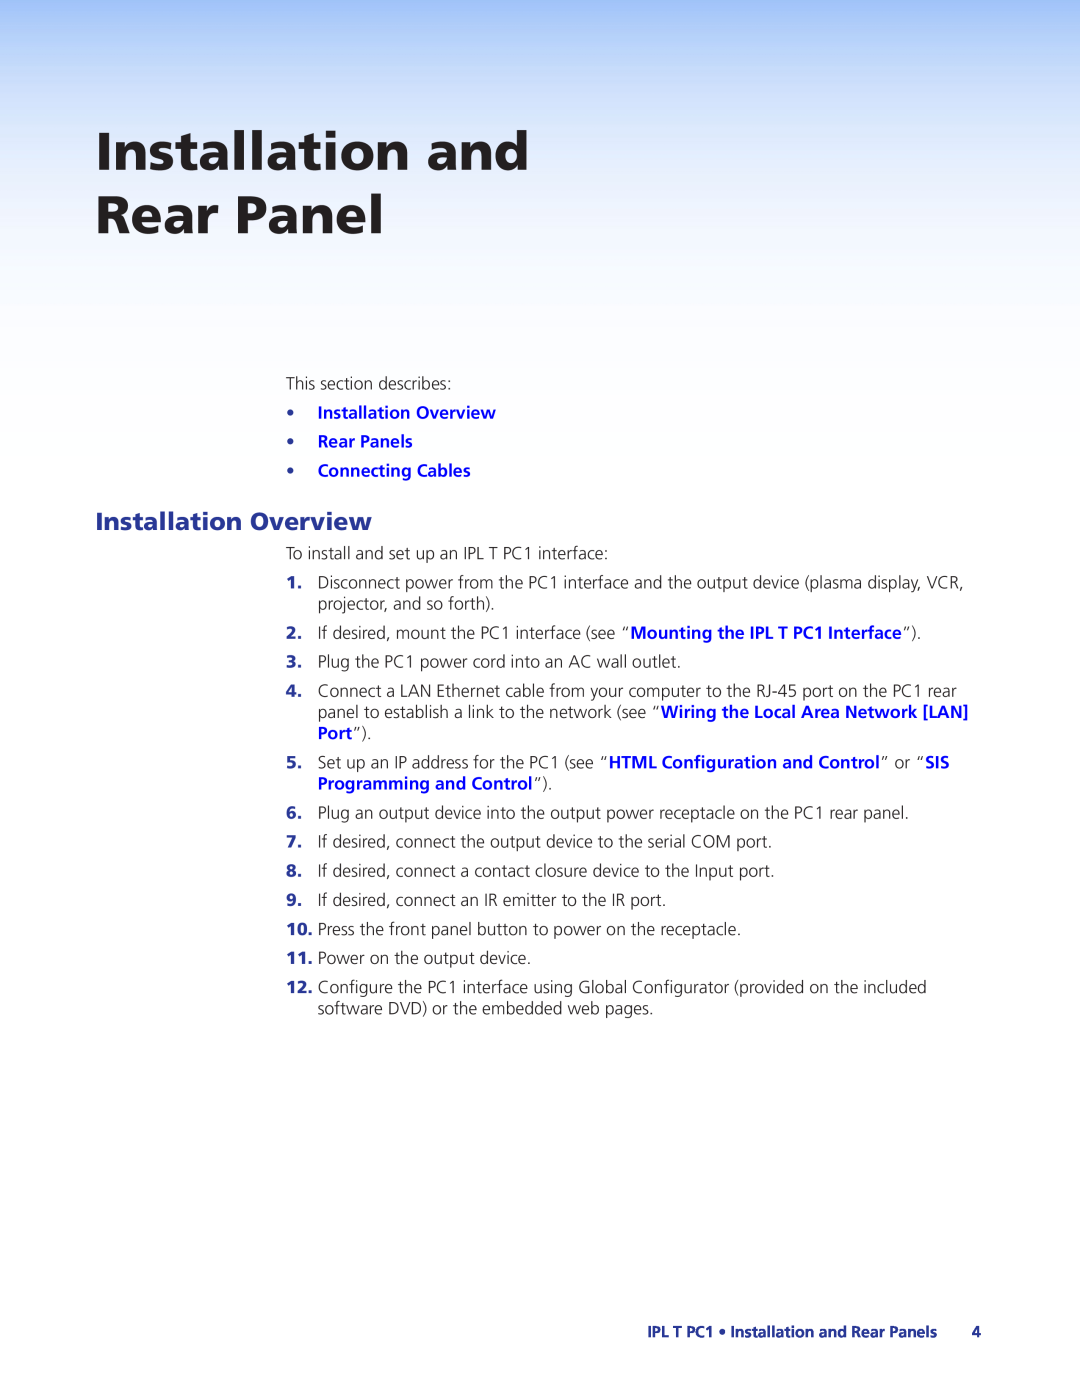 Extron electronic IPL T PC1i manual Installation and Rear Panel, Installation Overview 